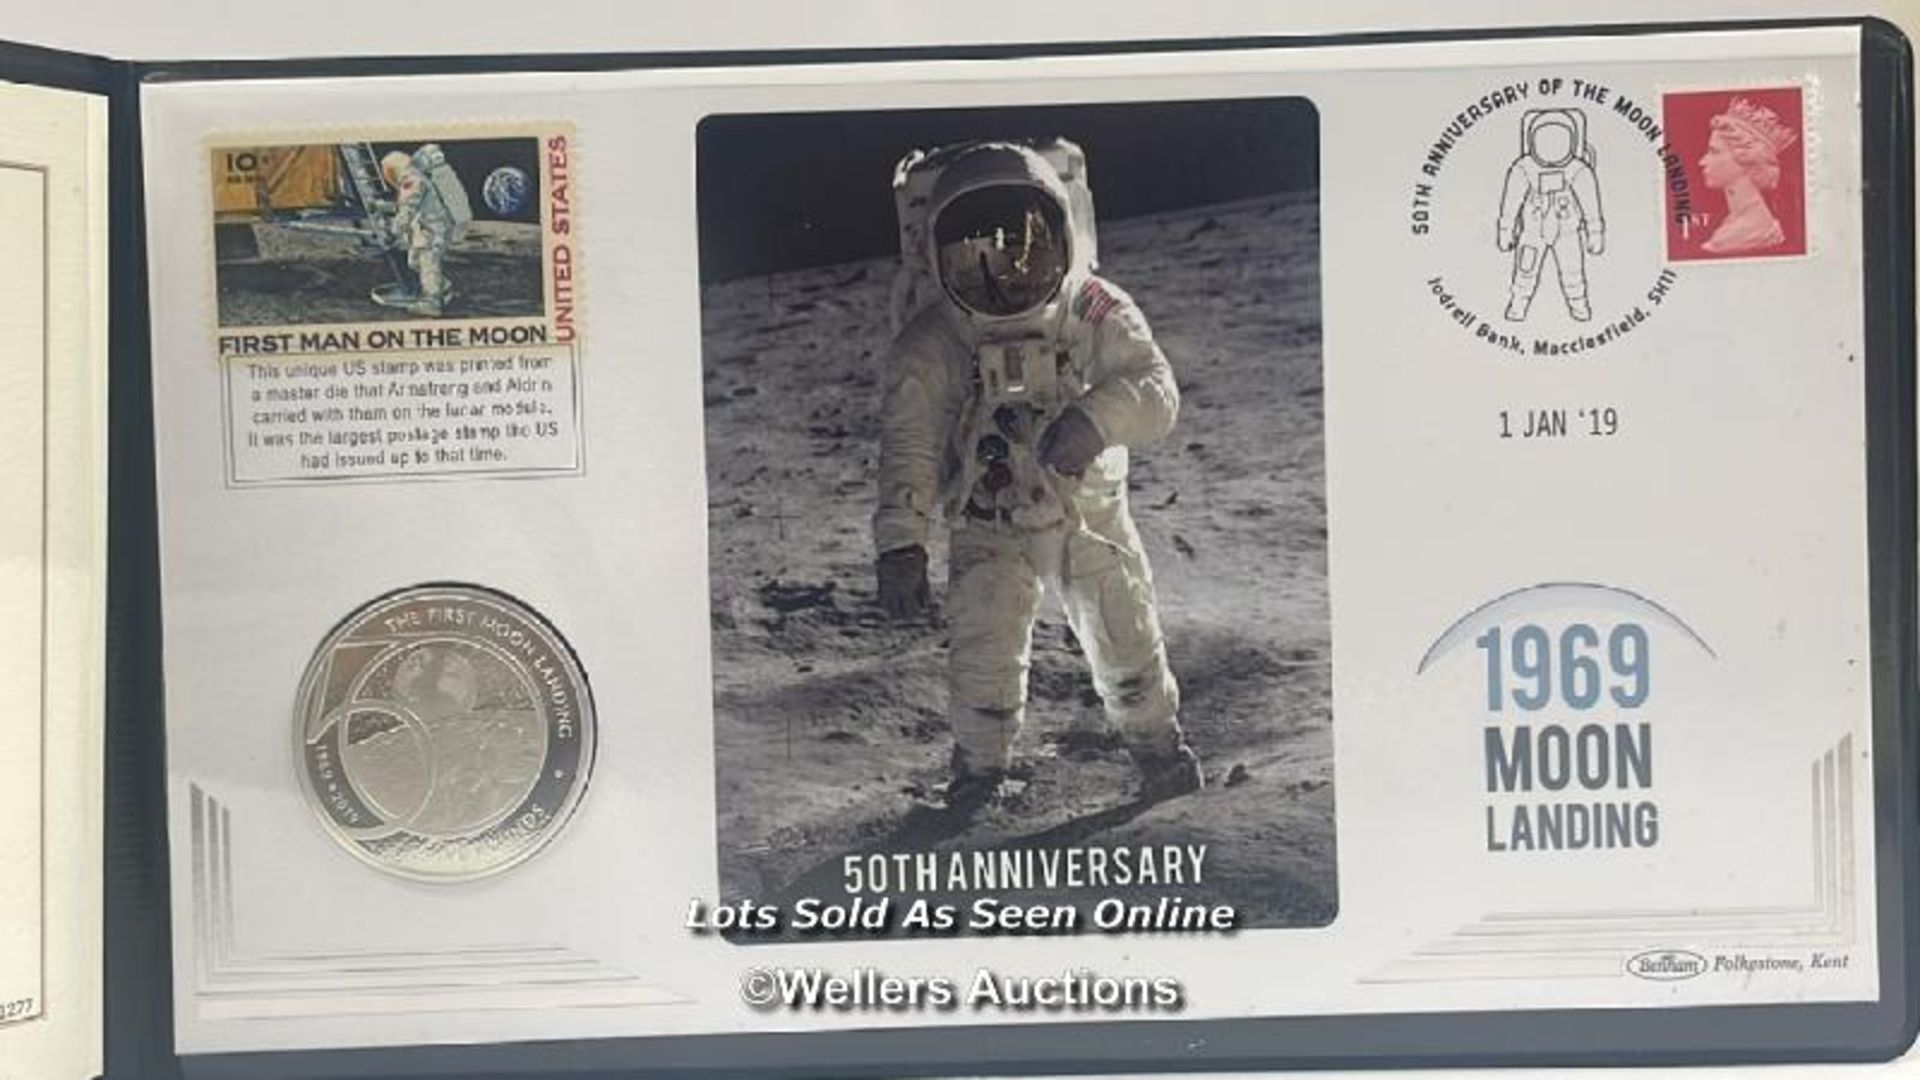 HARRINGTON & BYRNE 2019 50TH ANNIVERSARY OF THE MOON LANDING SILVER PROOF $1 COIN AND MOON LANDING - Image 5 of 8